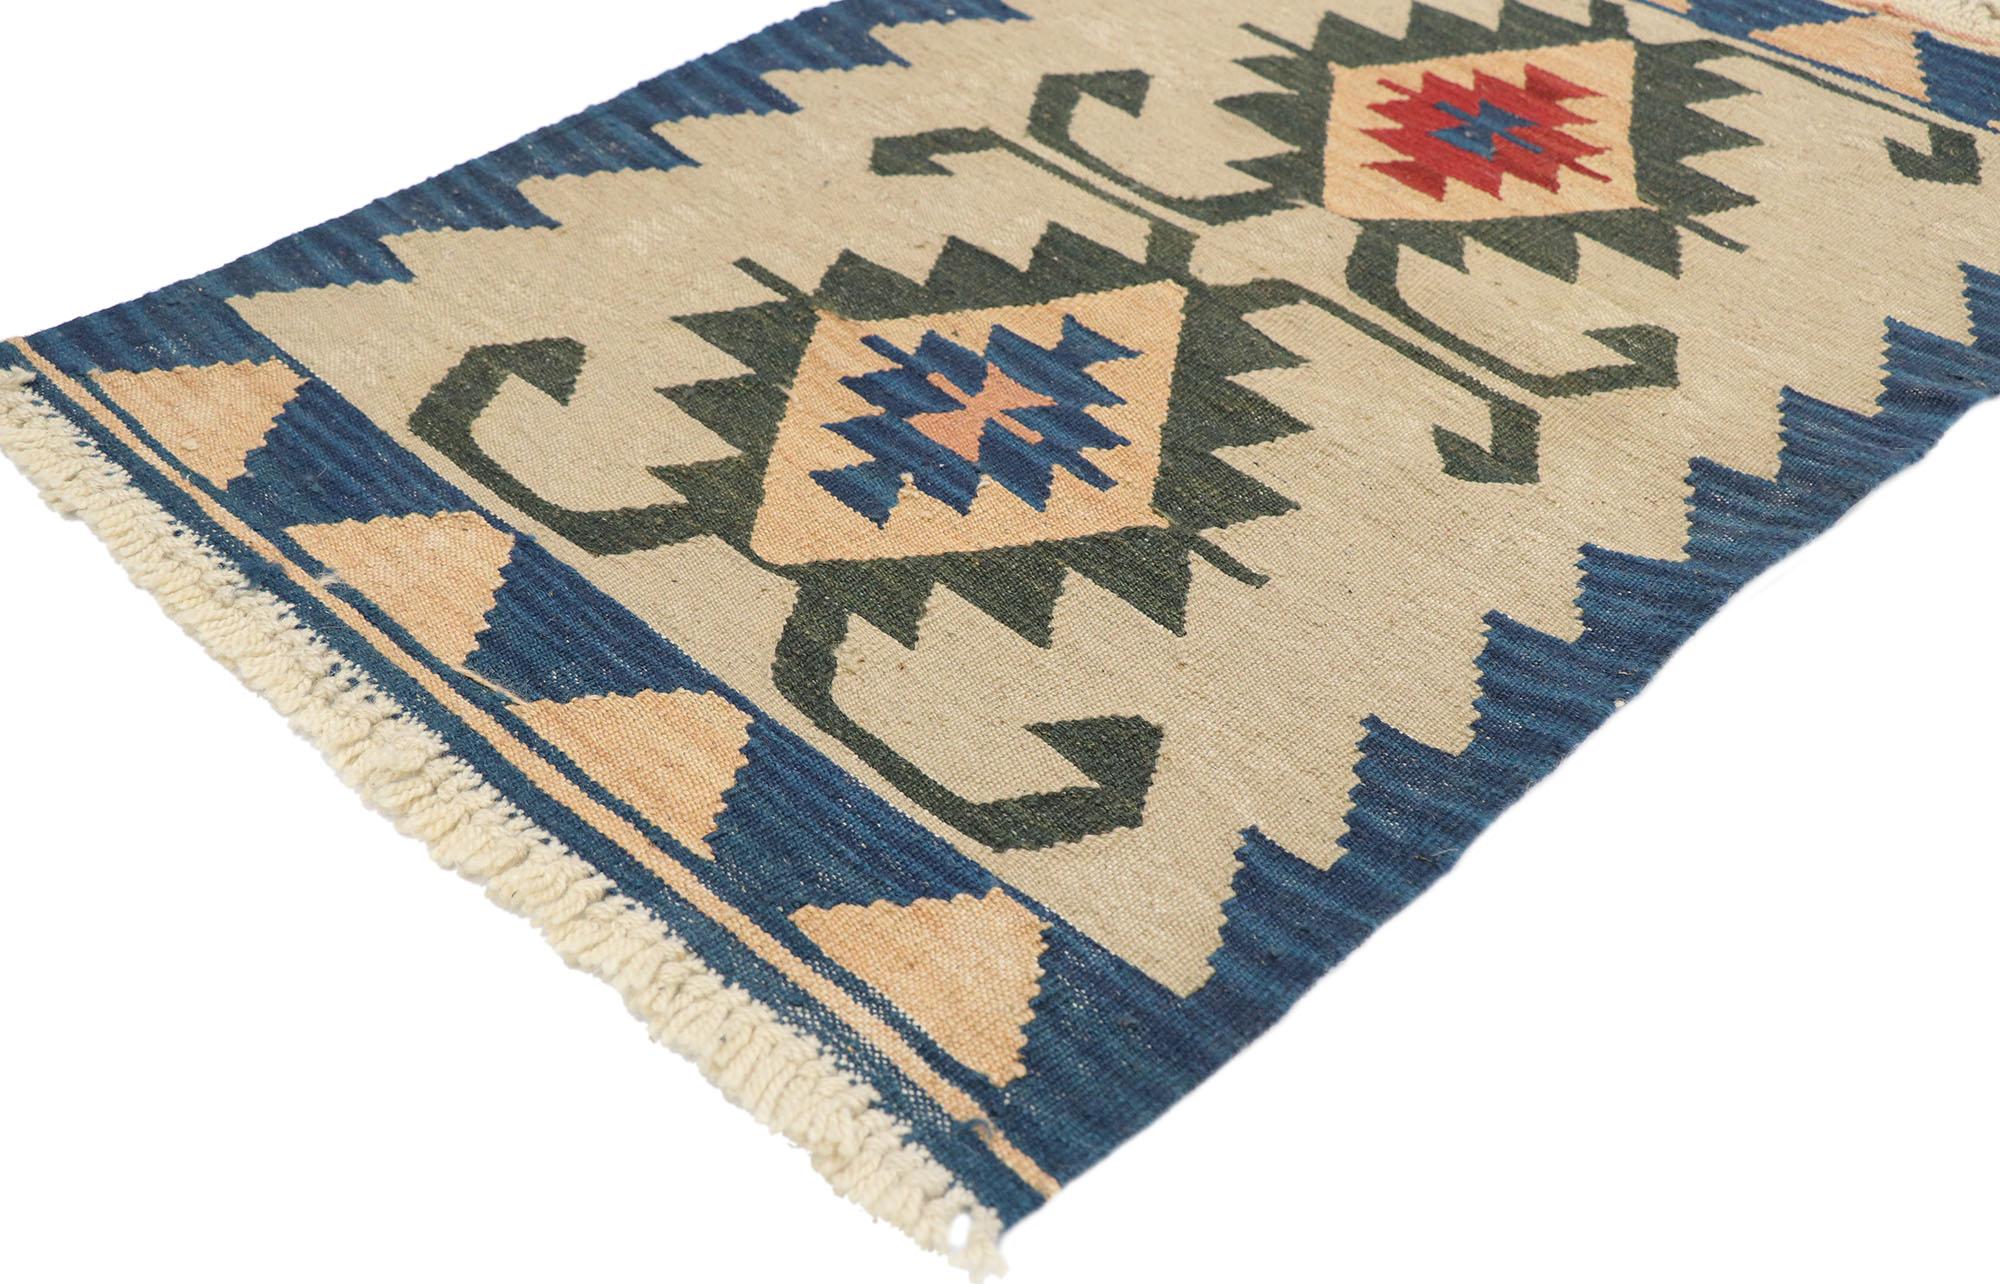 77885, vintage Persian Shiraz Kilim rug with Tribal style. Full of tiny details and a bold expressive design combined with vibrant colors and tribal style, this hand-woven wool vintage Persian Shiraz kilim rug is a captivating vision of woven